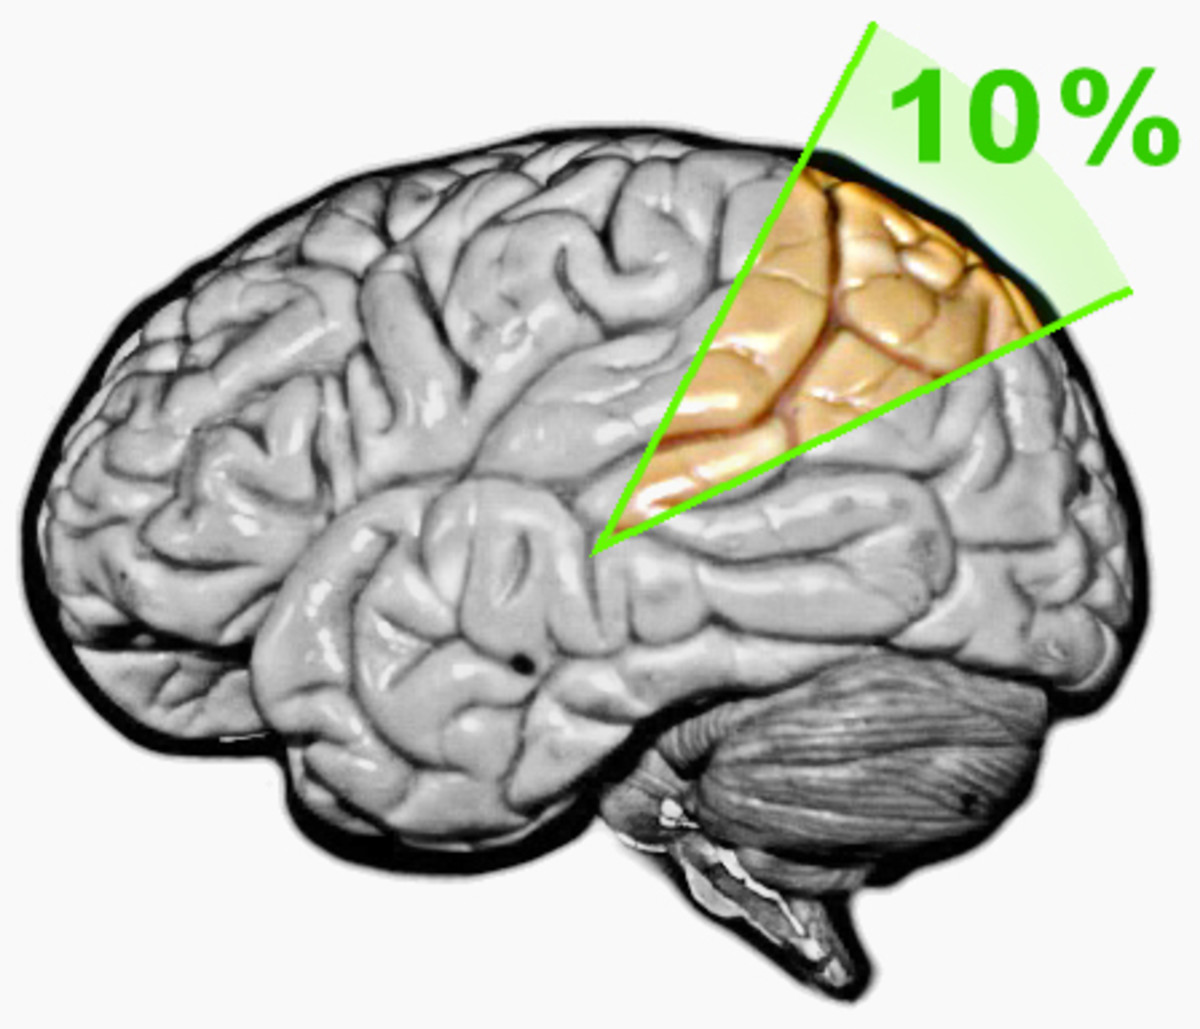 It's a myth that we use only 10% of our brains. 